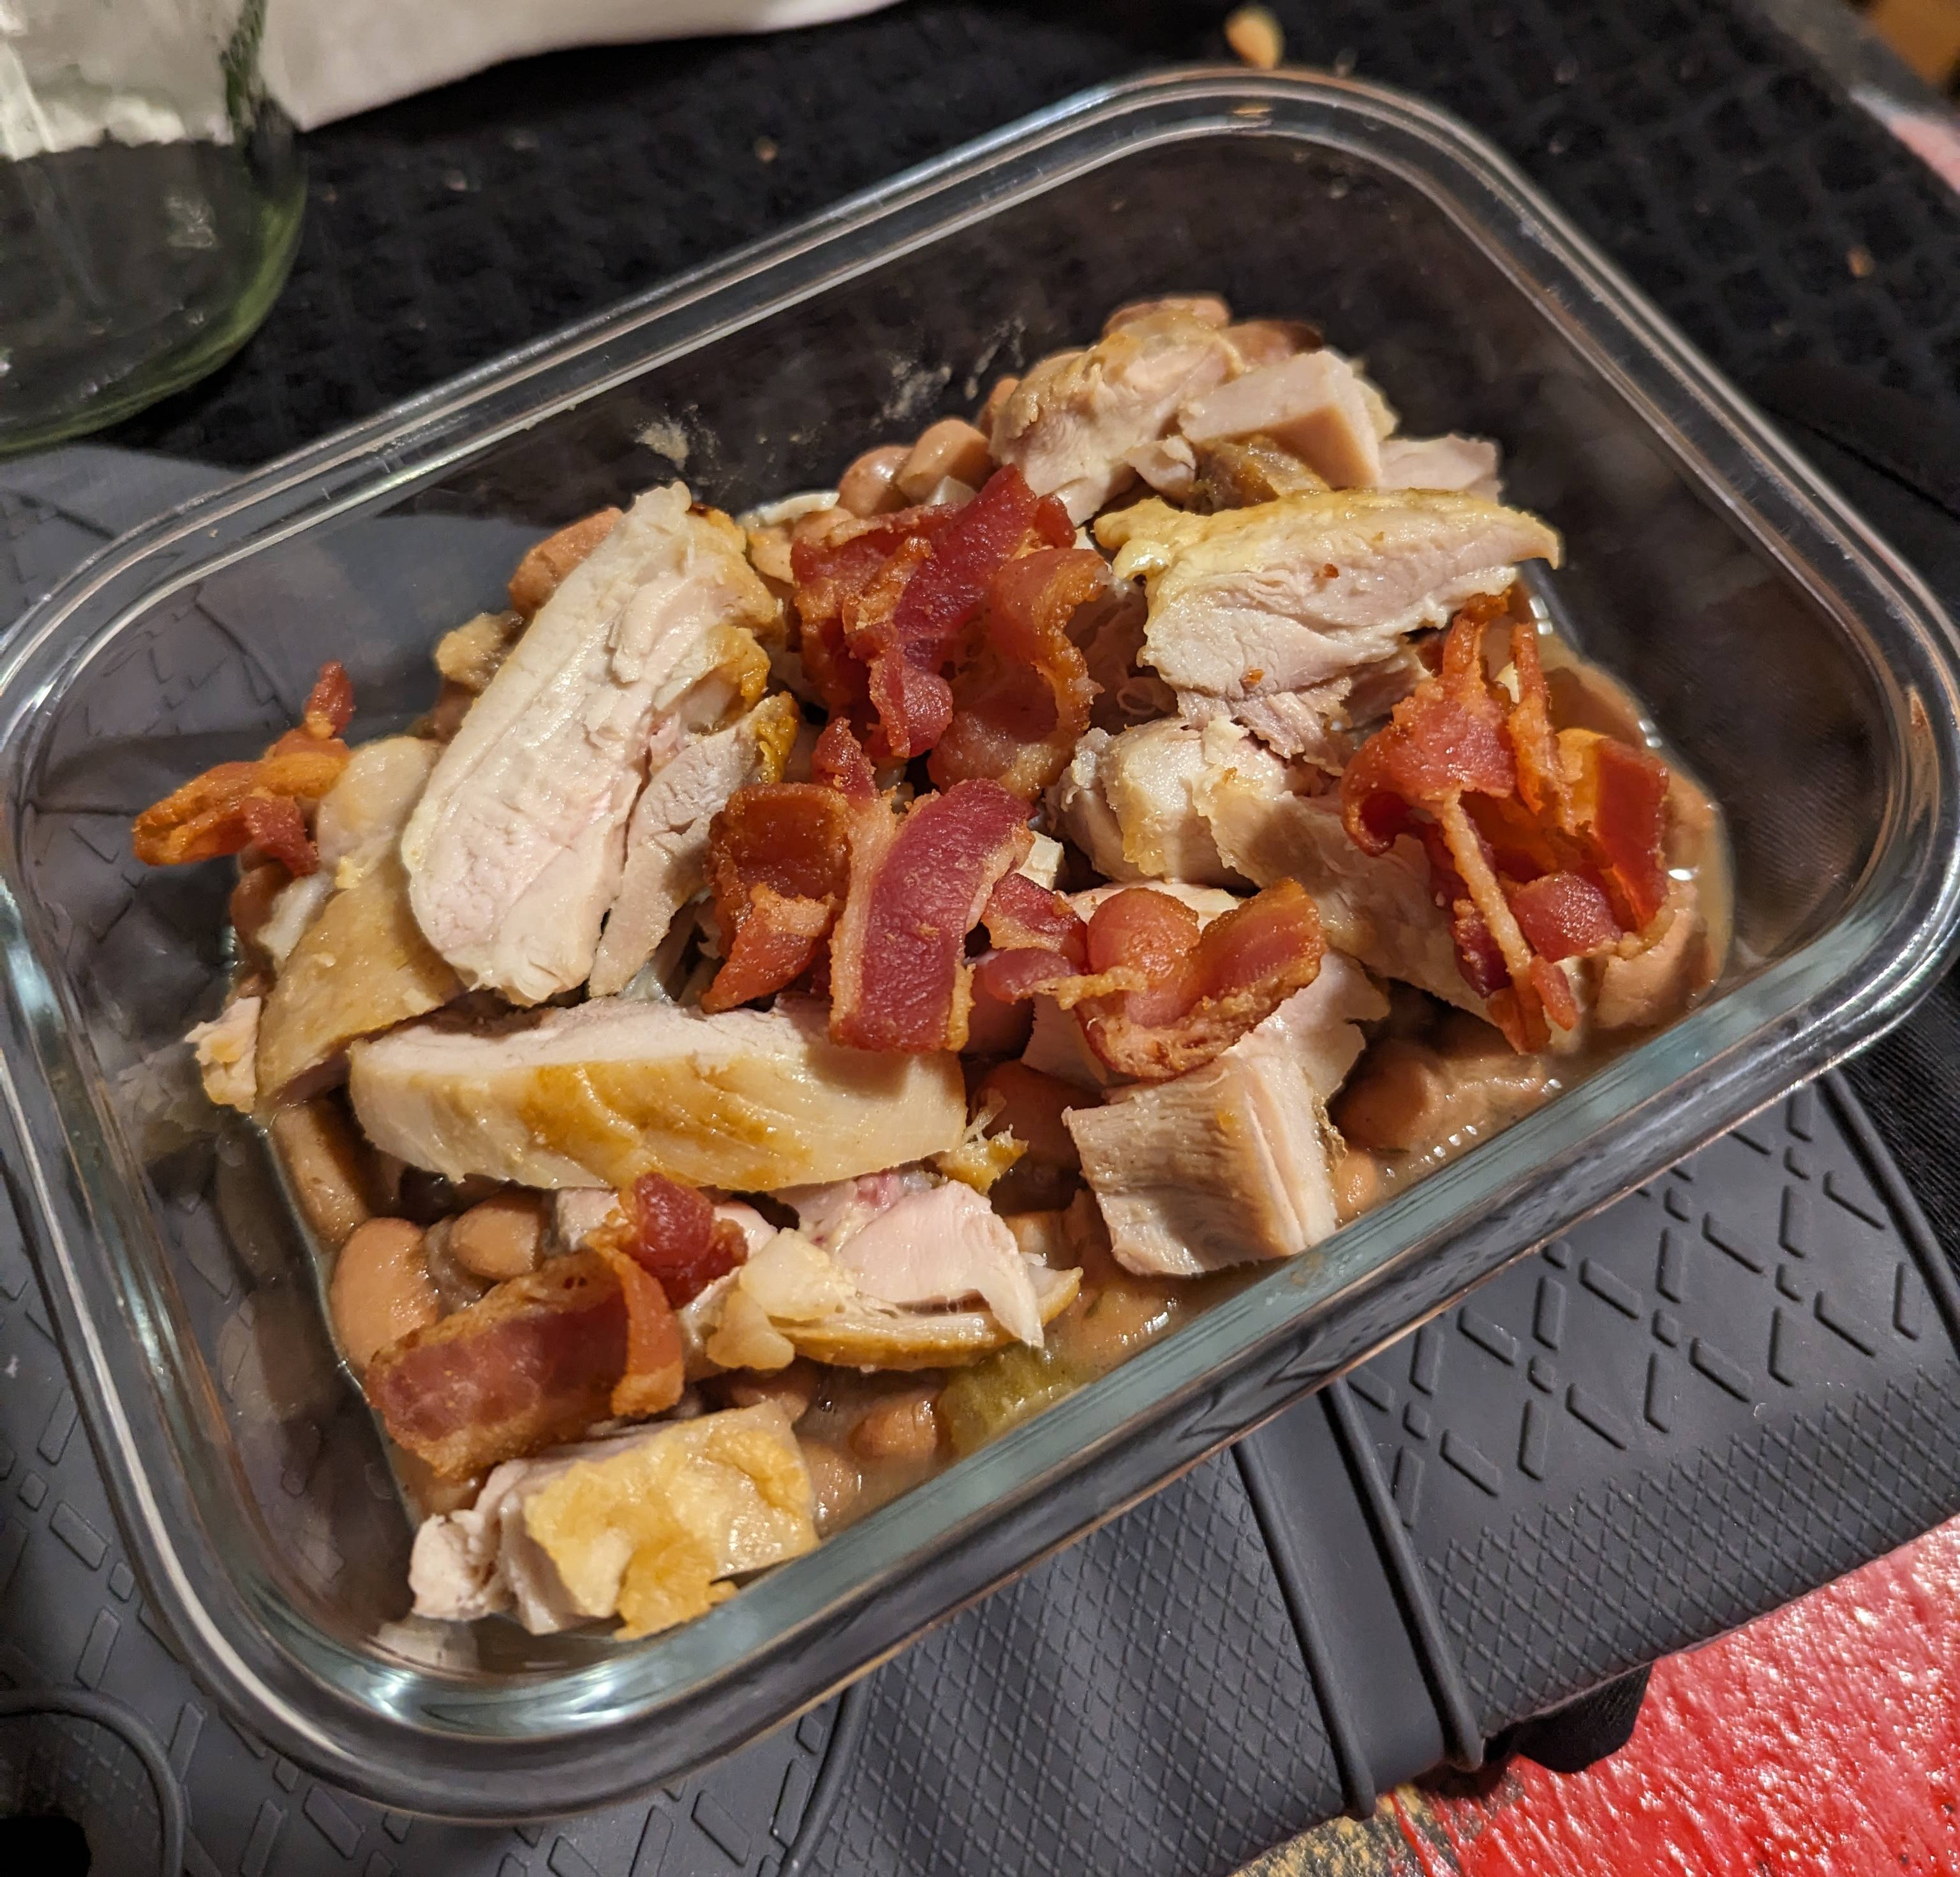 A glass container of beans with chicken and bacon on top.